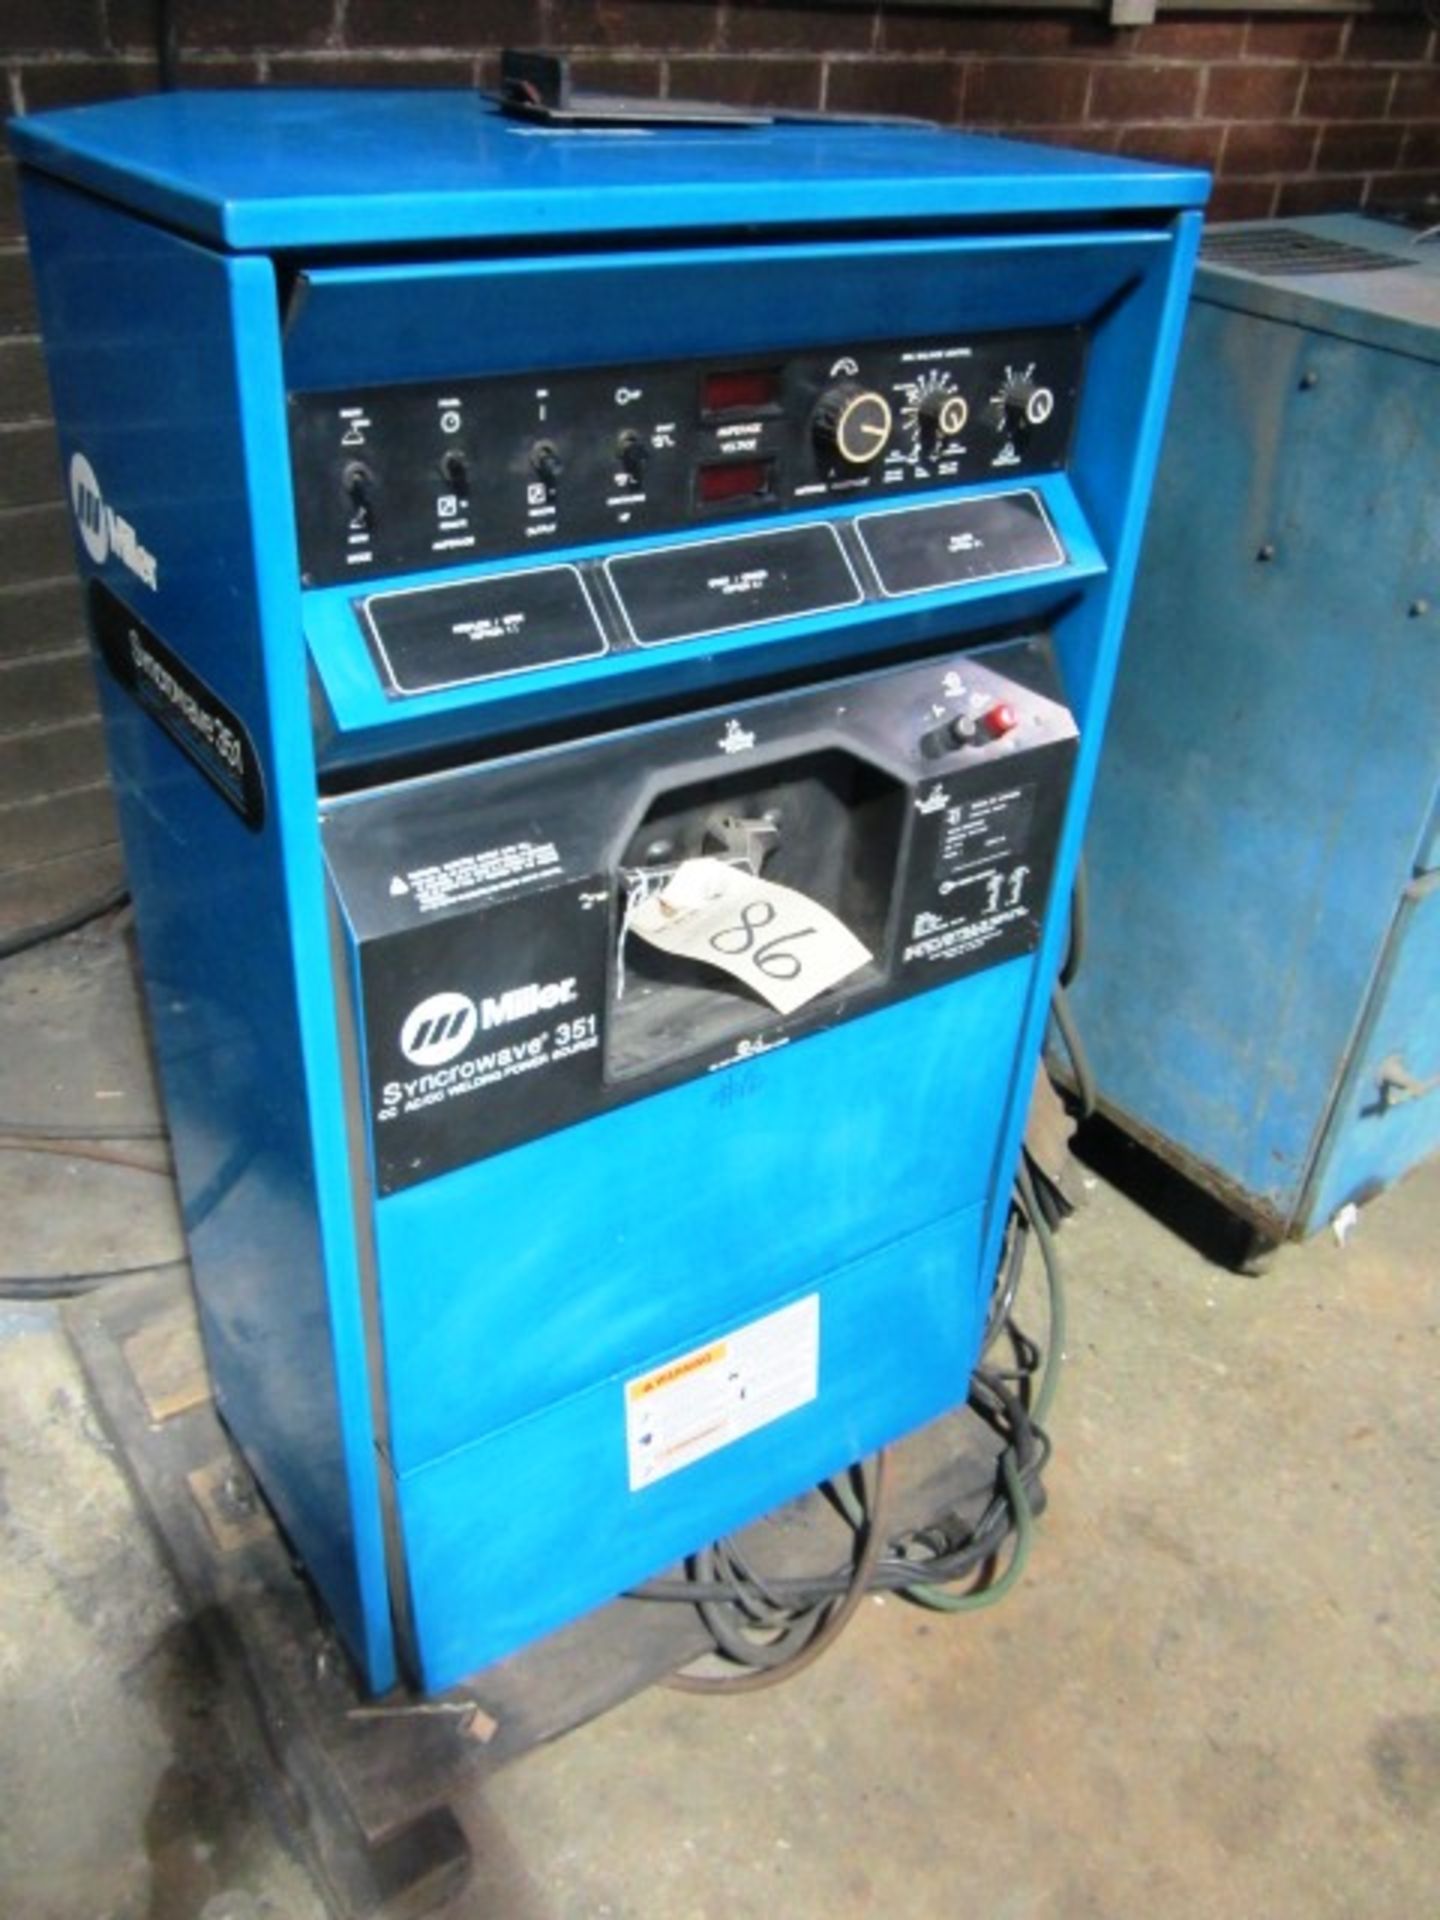 Miller Syncrowave 351 Power Source with Digital Readout, sn:KF974252